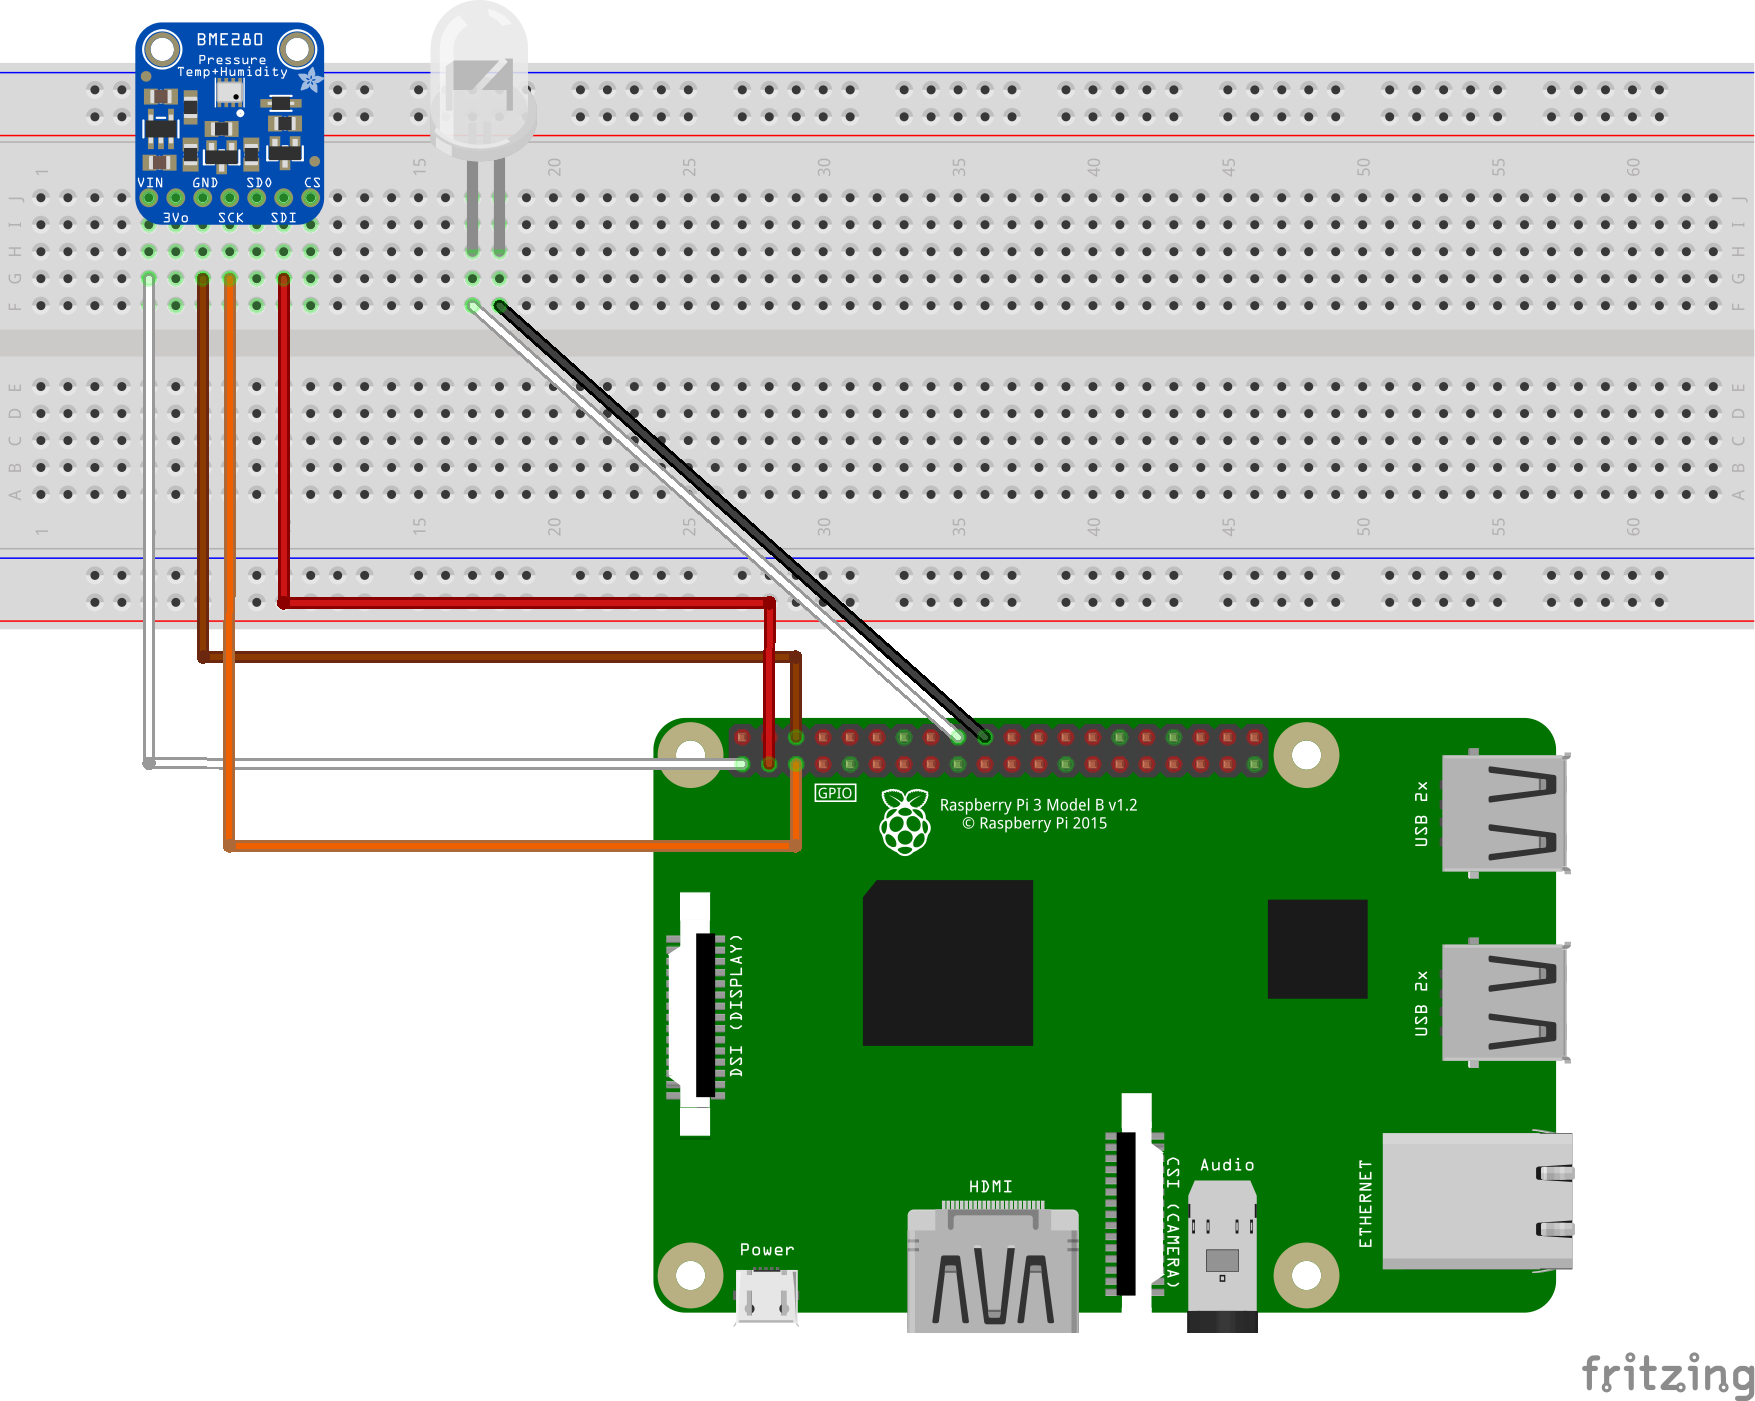 The Raspberry Pi and sensor connection